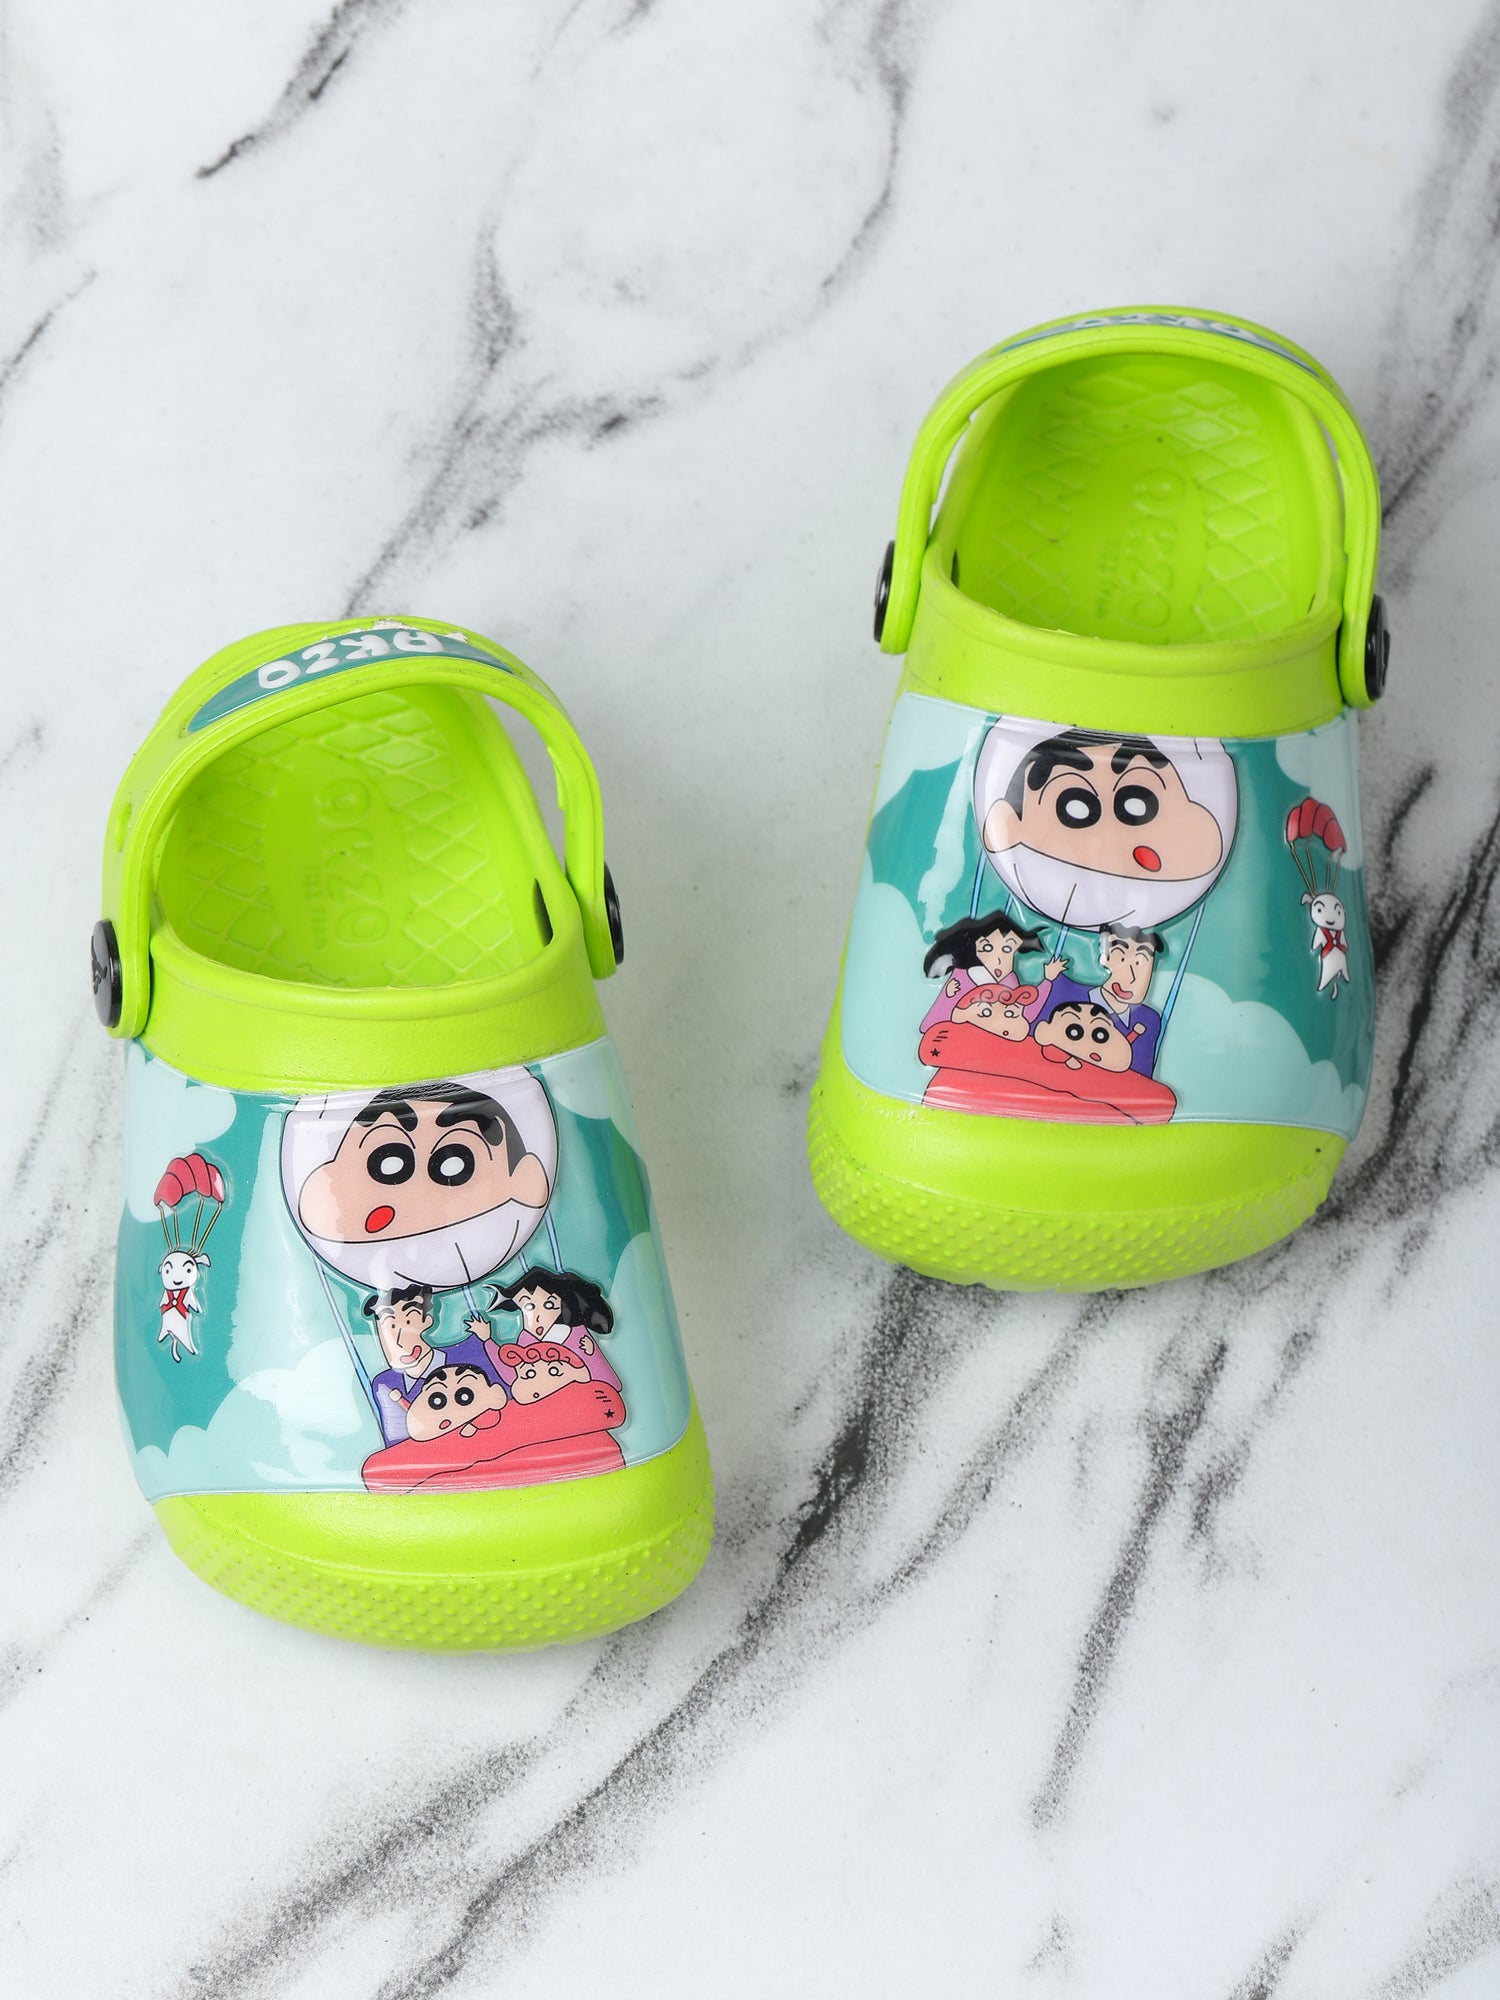 ZCK-0902 CLOGS FOR KIDS